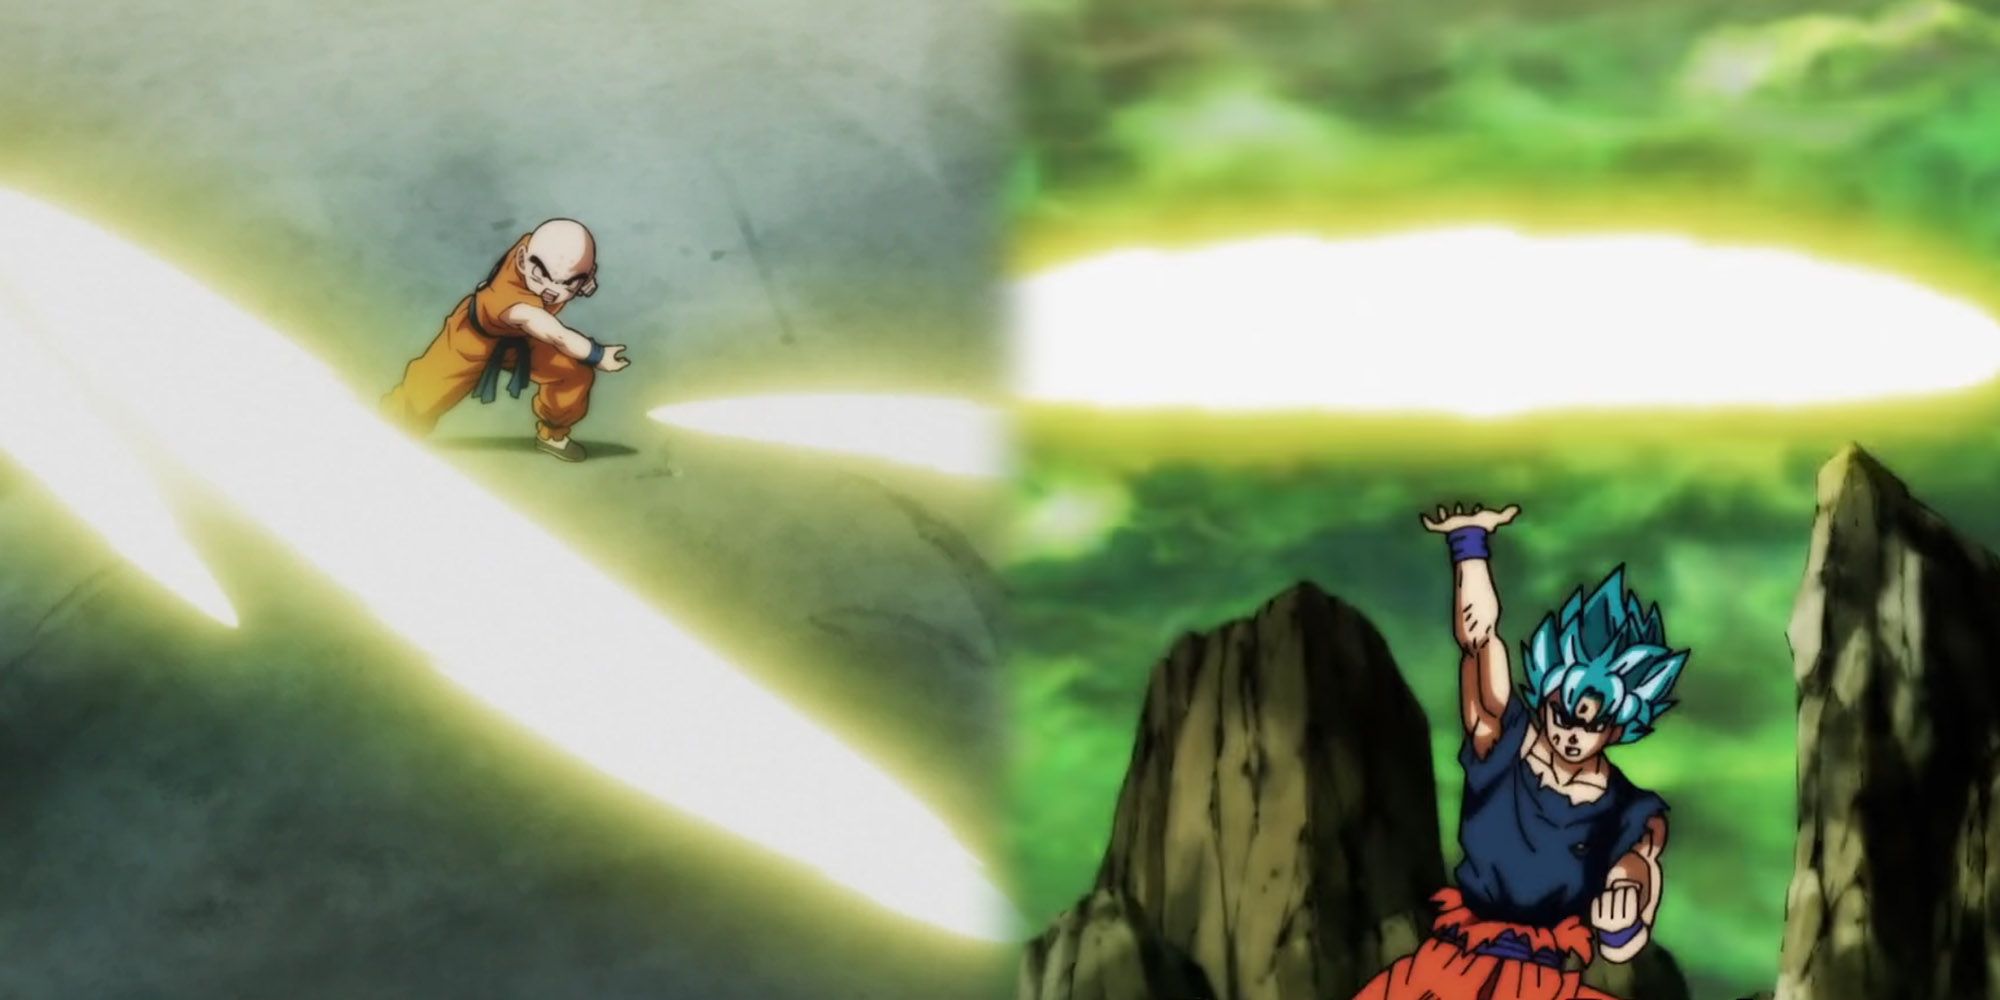 Dragon Ball - Krillin Using Destructo Disc Next To Image Of Goku Using It As Well